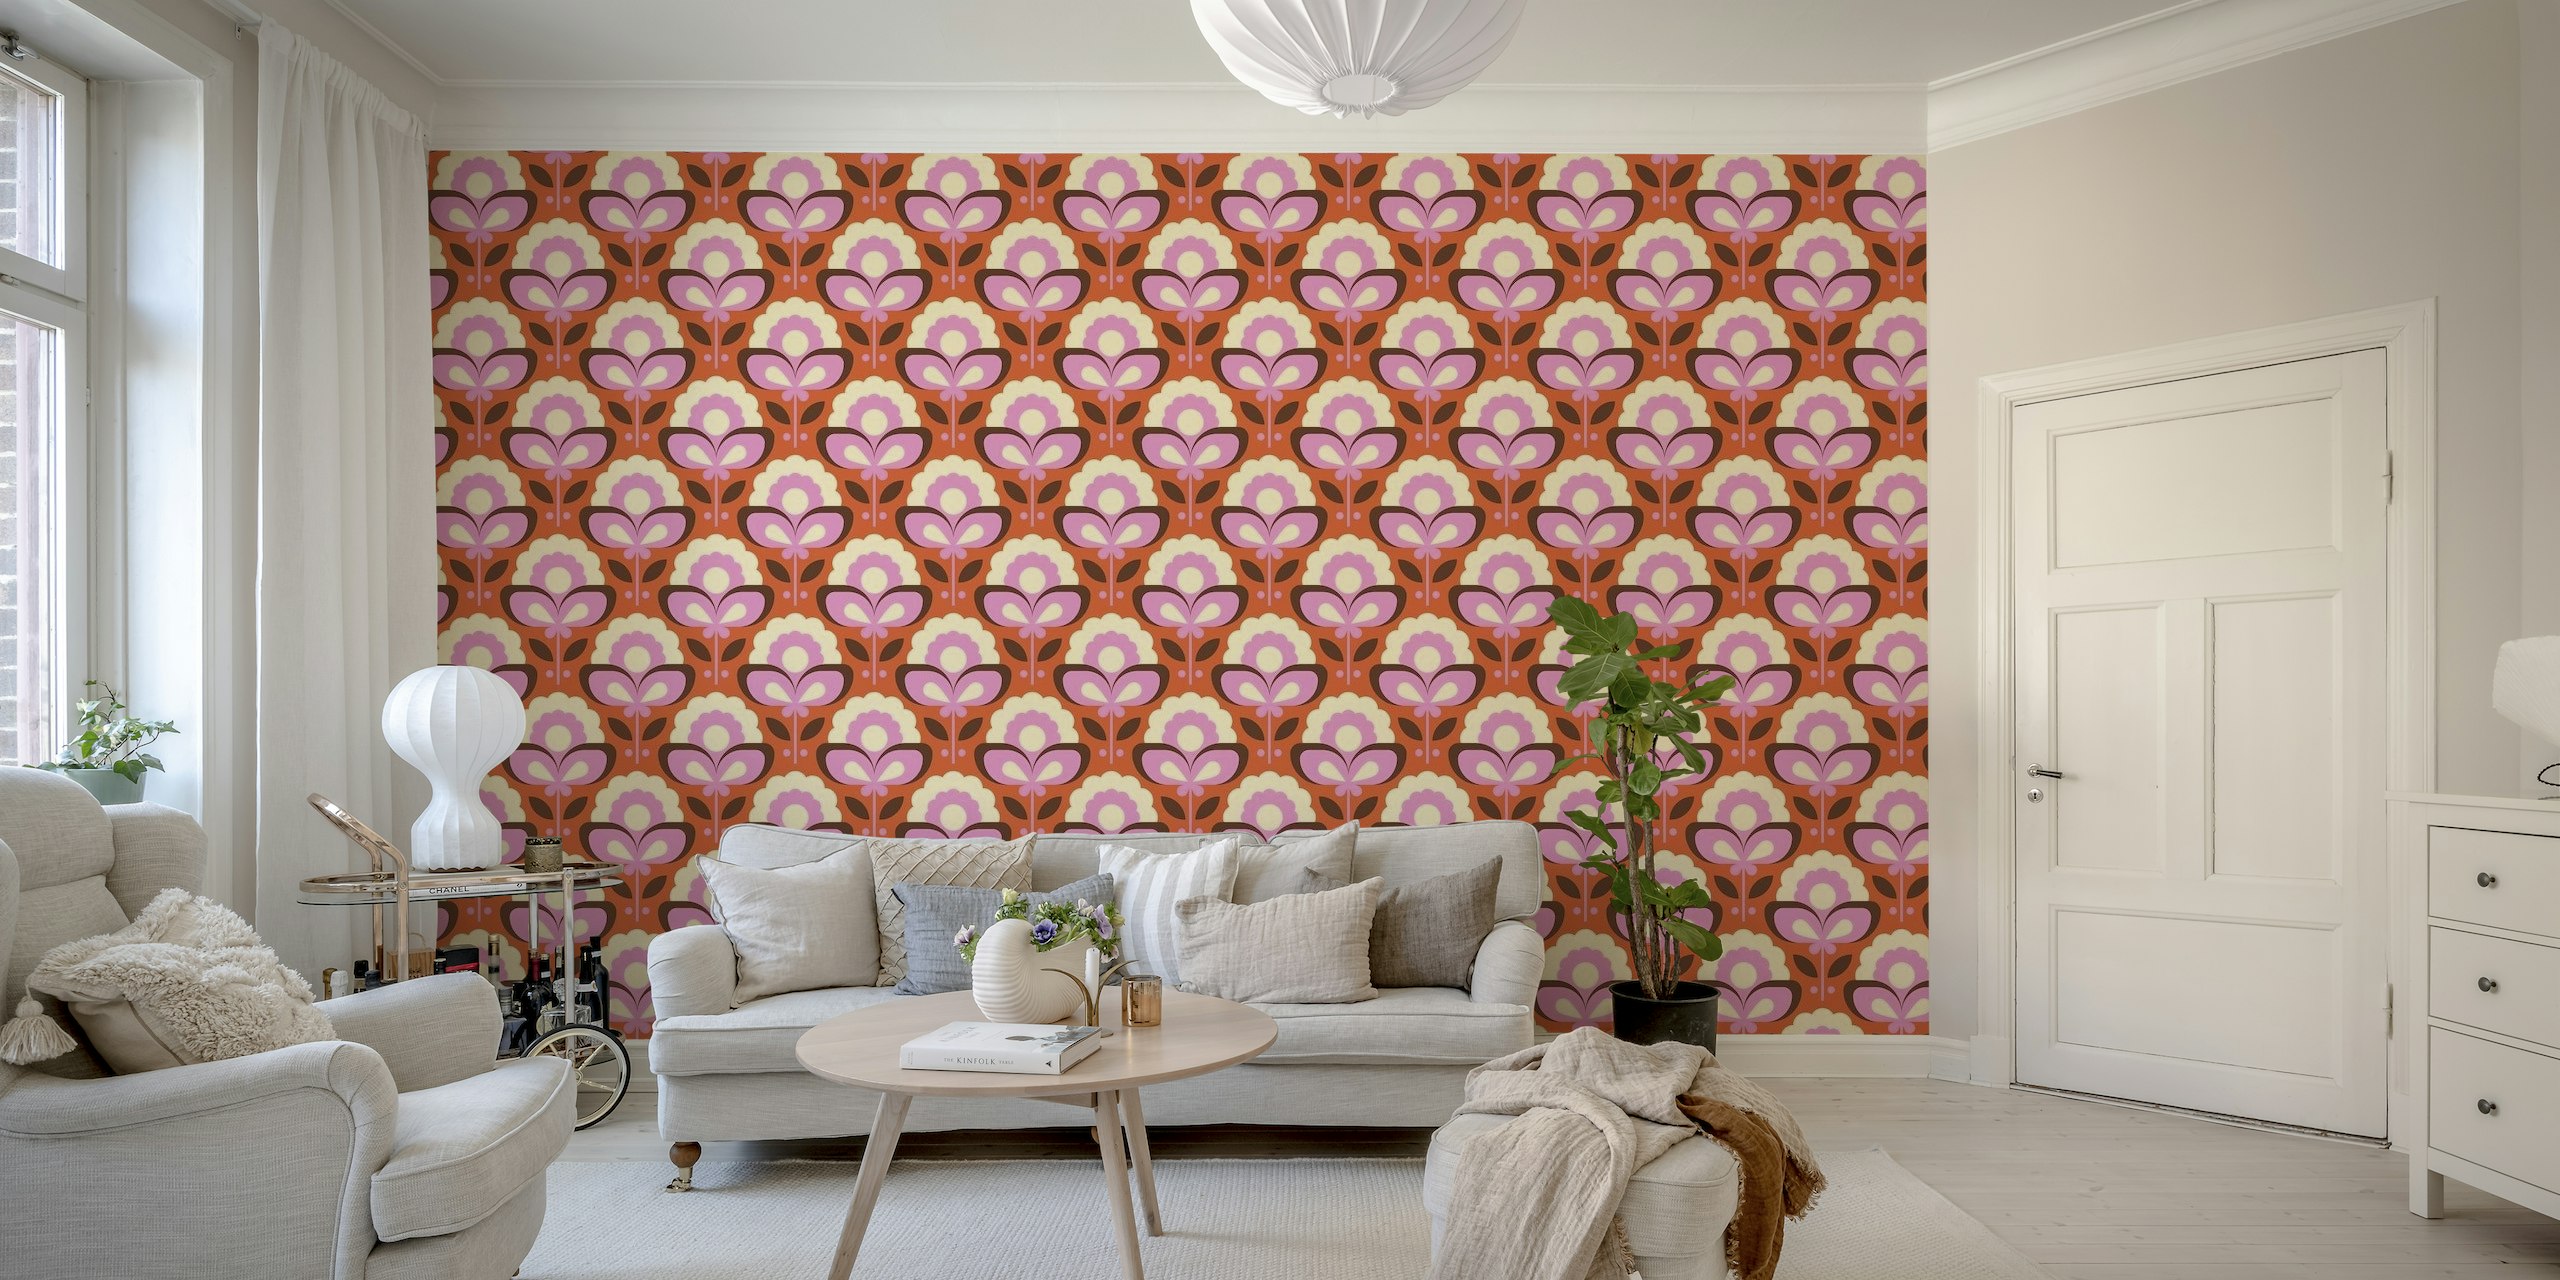 Retro-style wall mural with pink and orange flowers and patterns